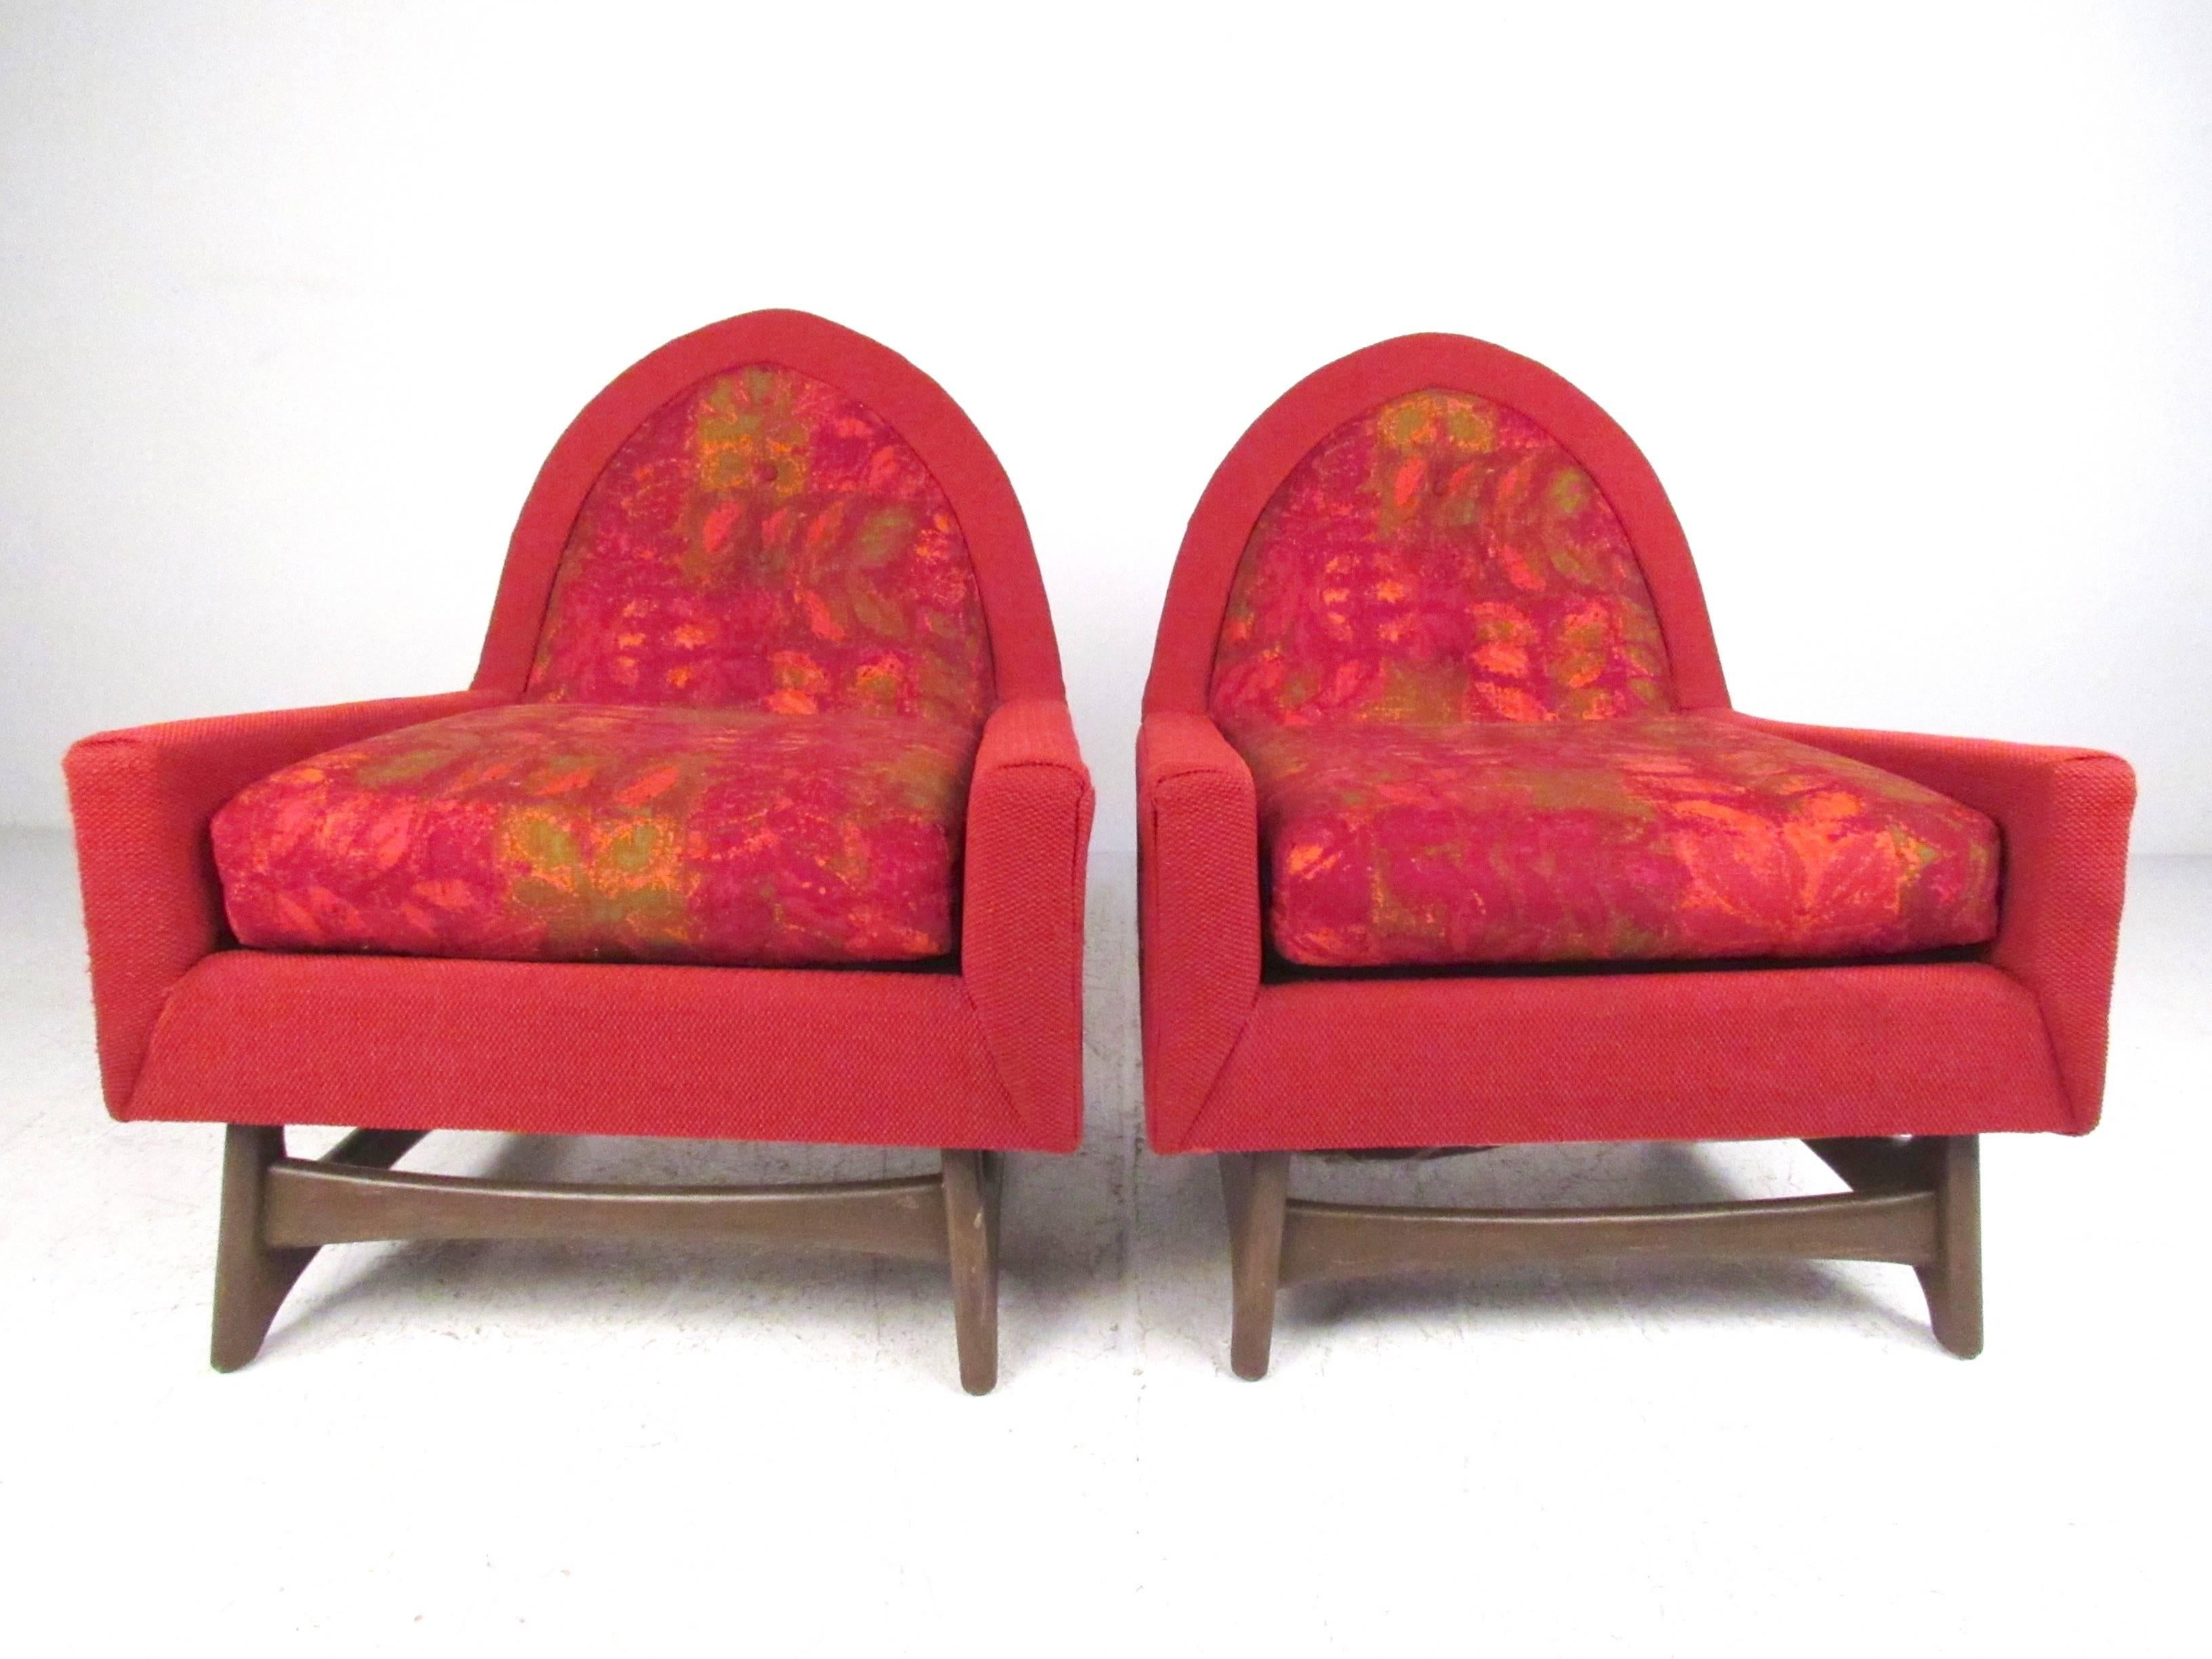 This stylish pair of sculptural lounge chairs in the style of Adrian Pearsall for Craft Associates features unique walnut bases and comfortable upholstered seats. The impressive visual design of the two-tone upholstery on these Mid-Century shaped